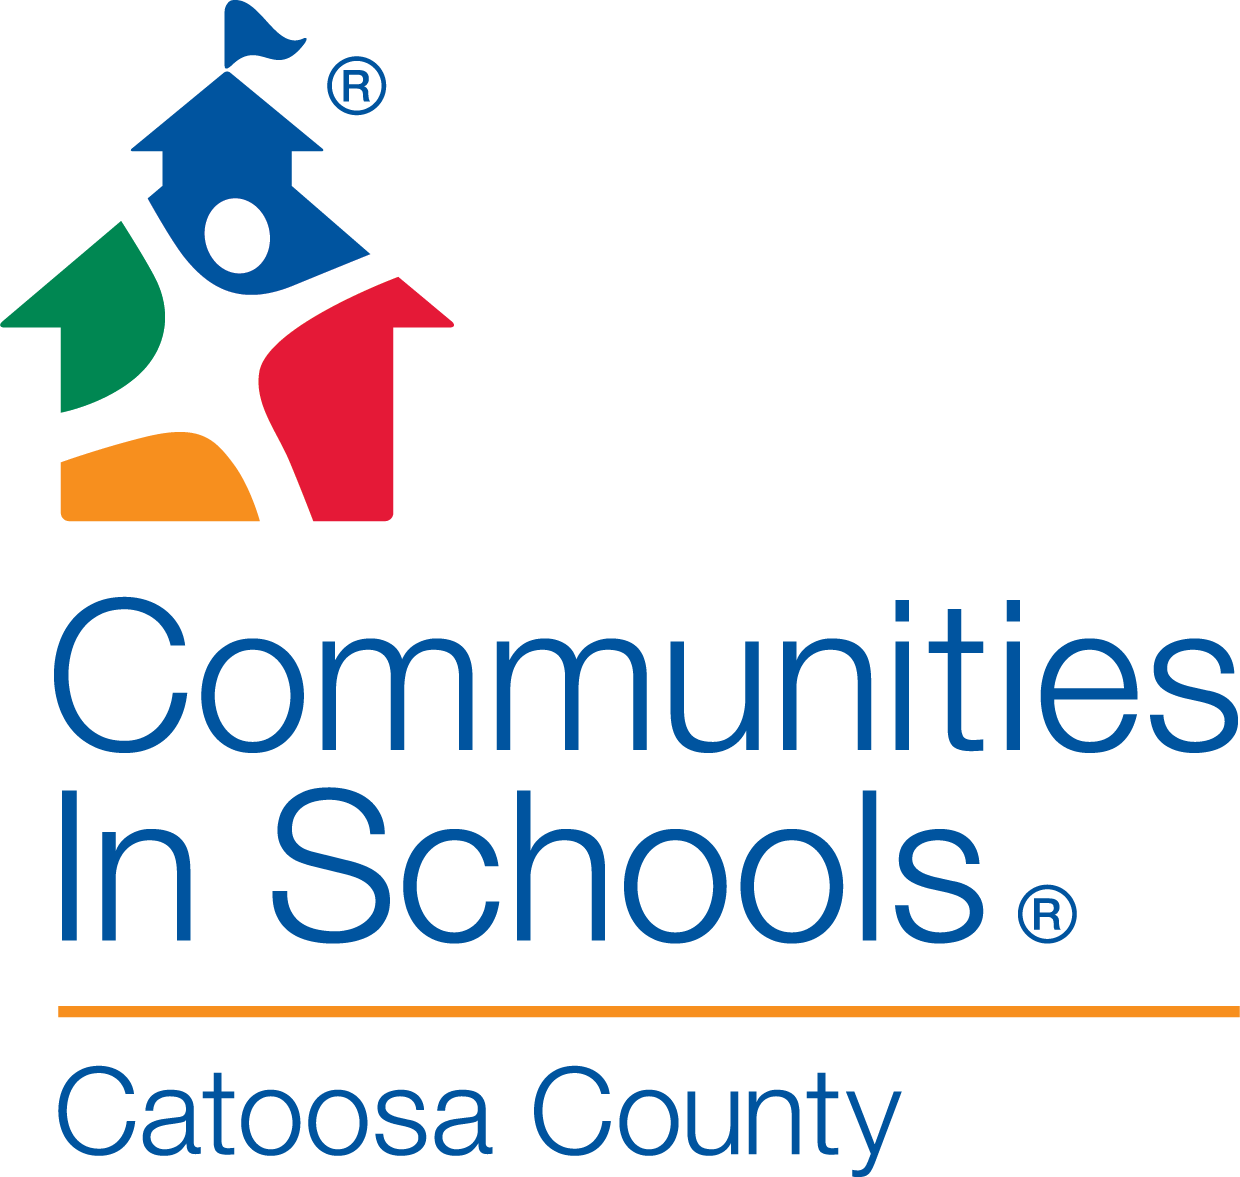 CIS_Catoosa_County_trademark.png